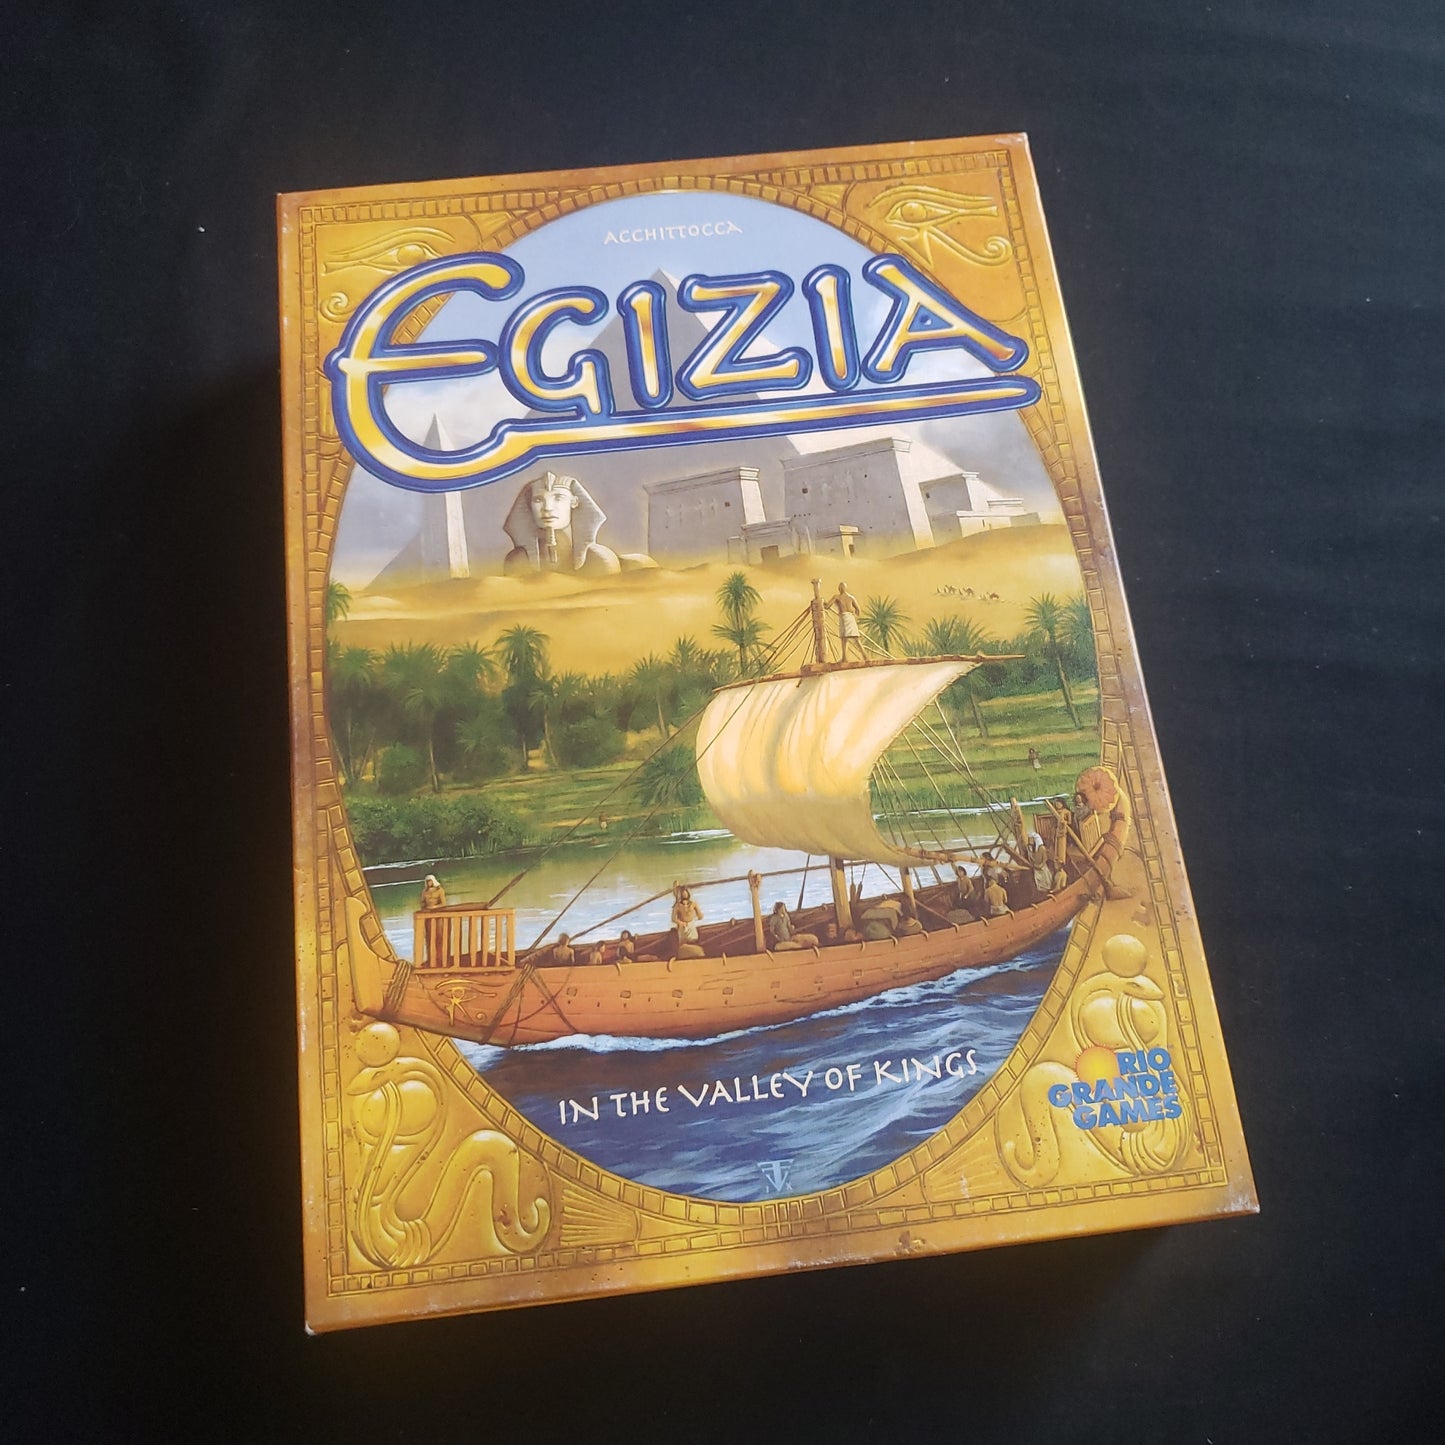 Image shows the front cover of the box of the Egizia board game